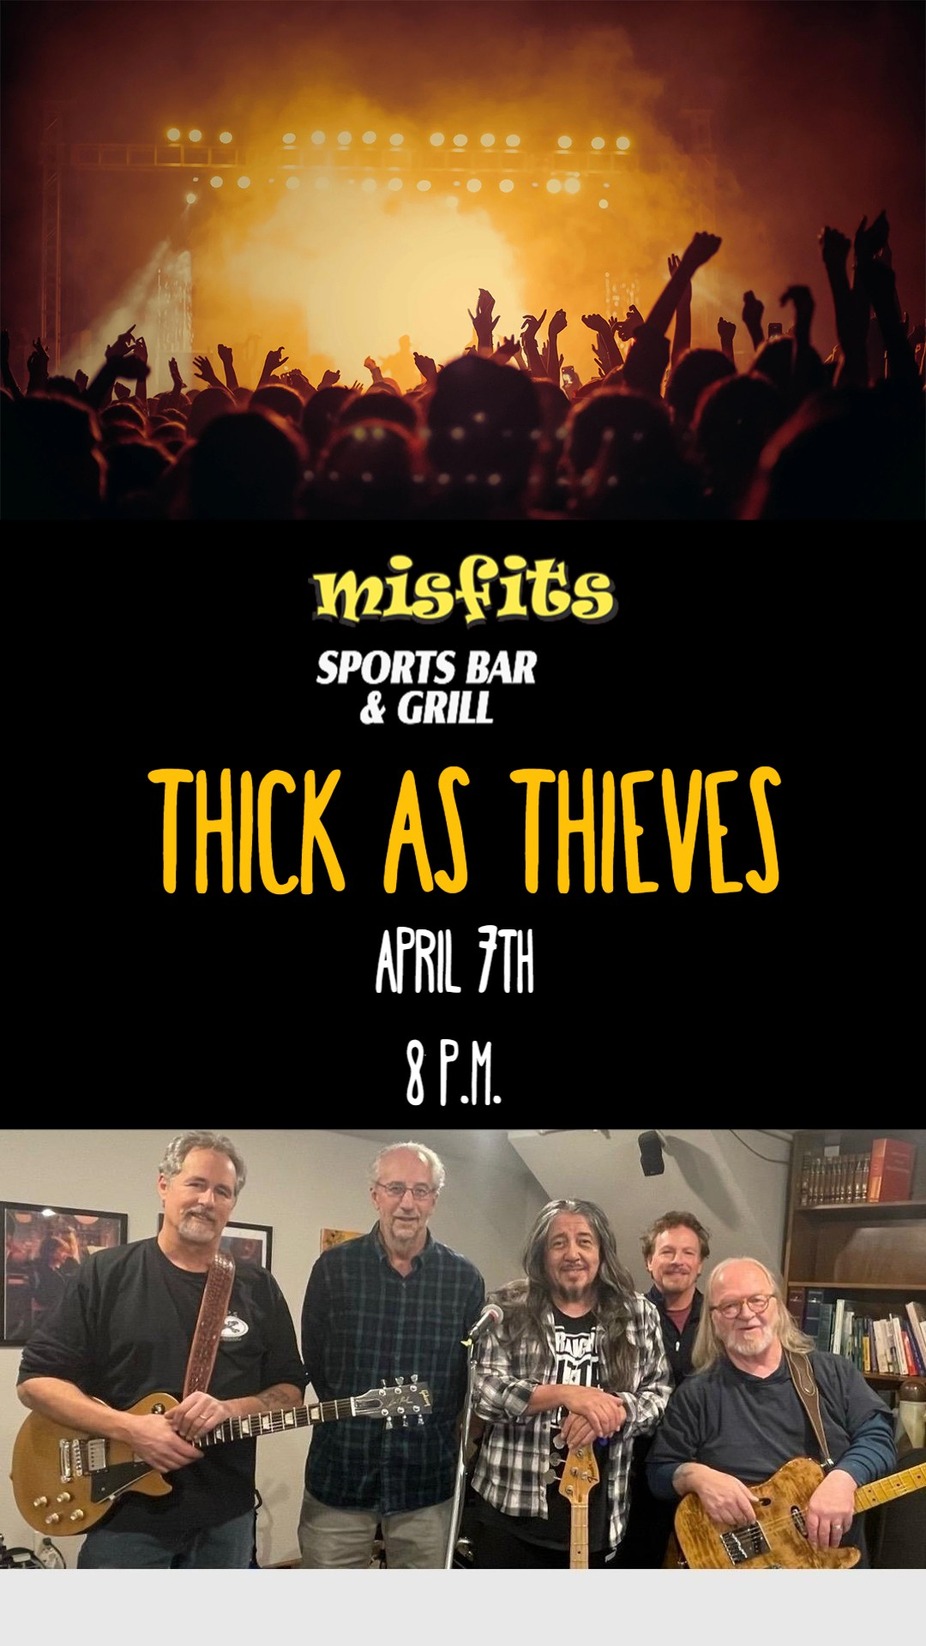 Thick as Thieves event photo